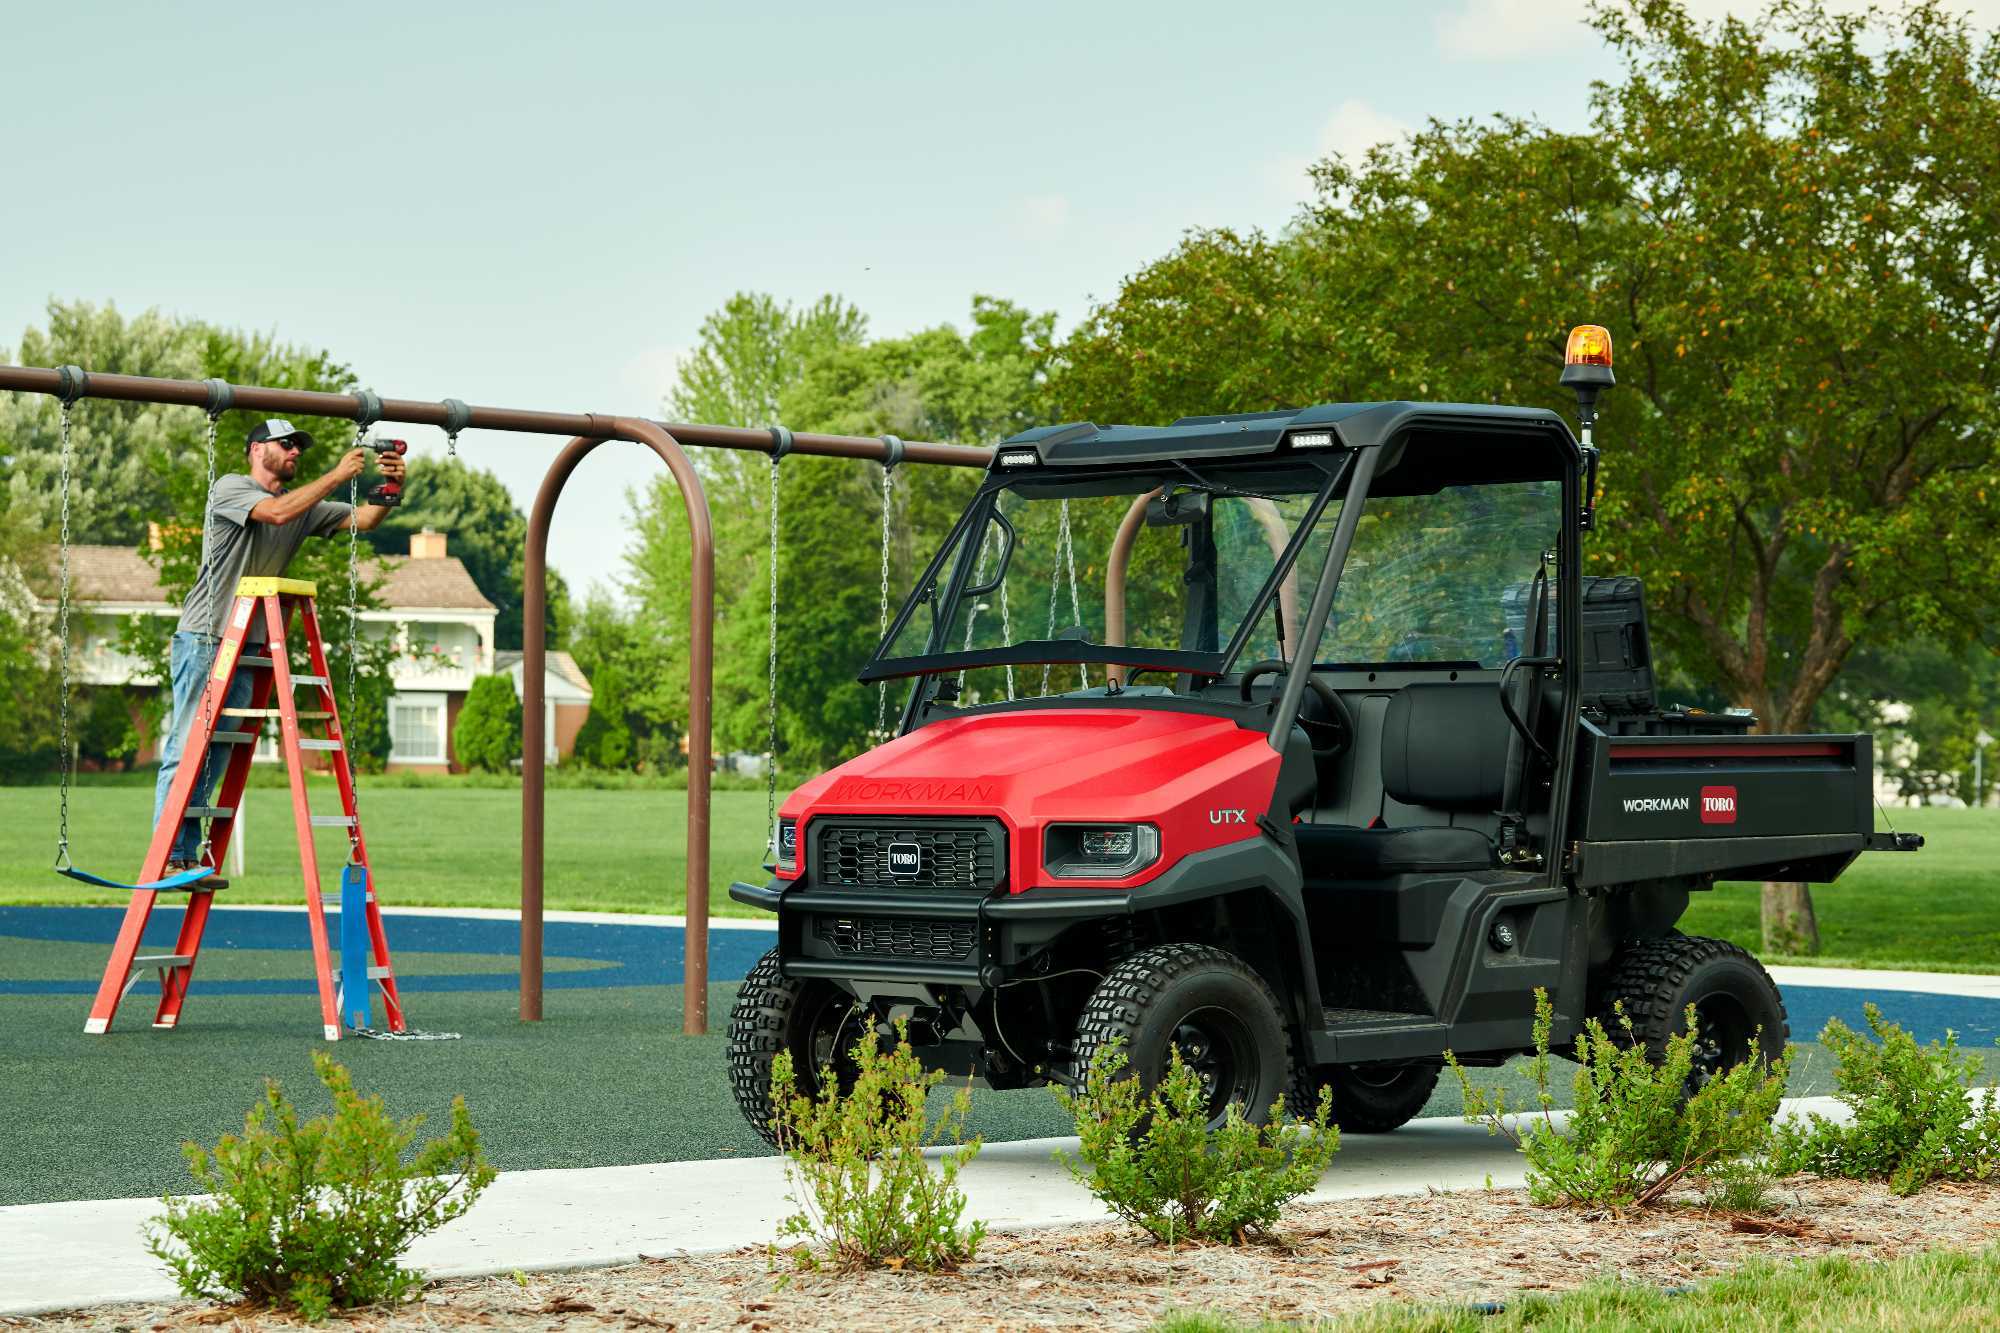 The All-New Toro® Workman® UTX is coming soon.